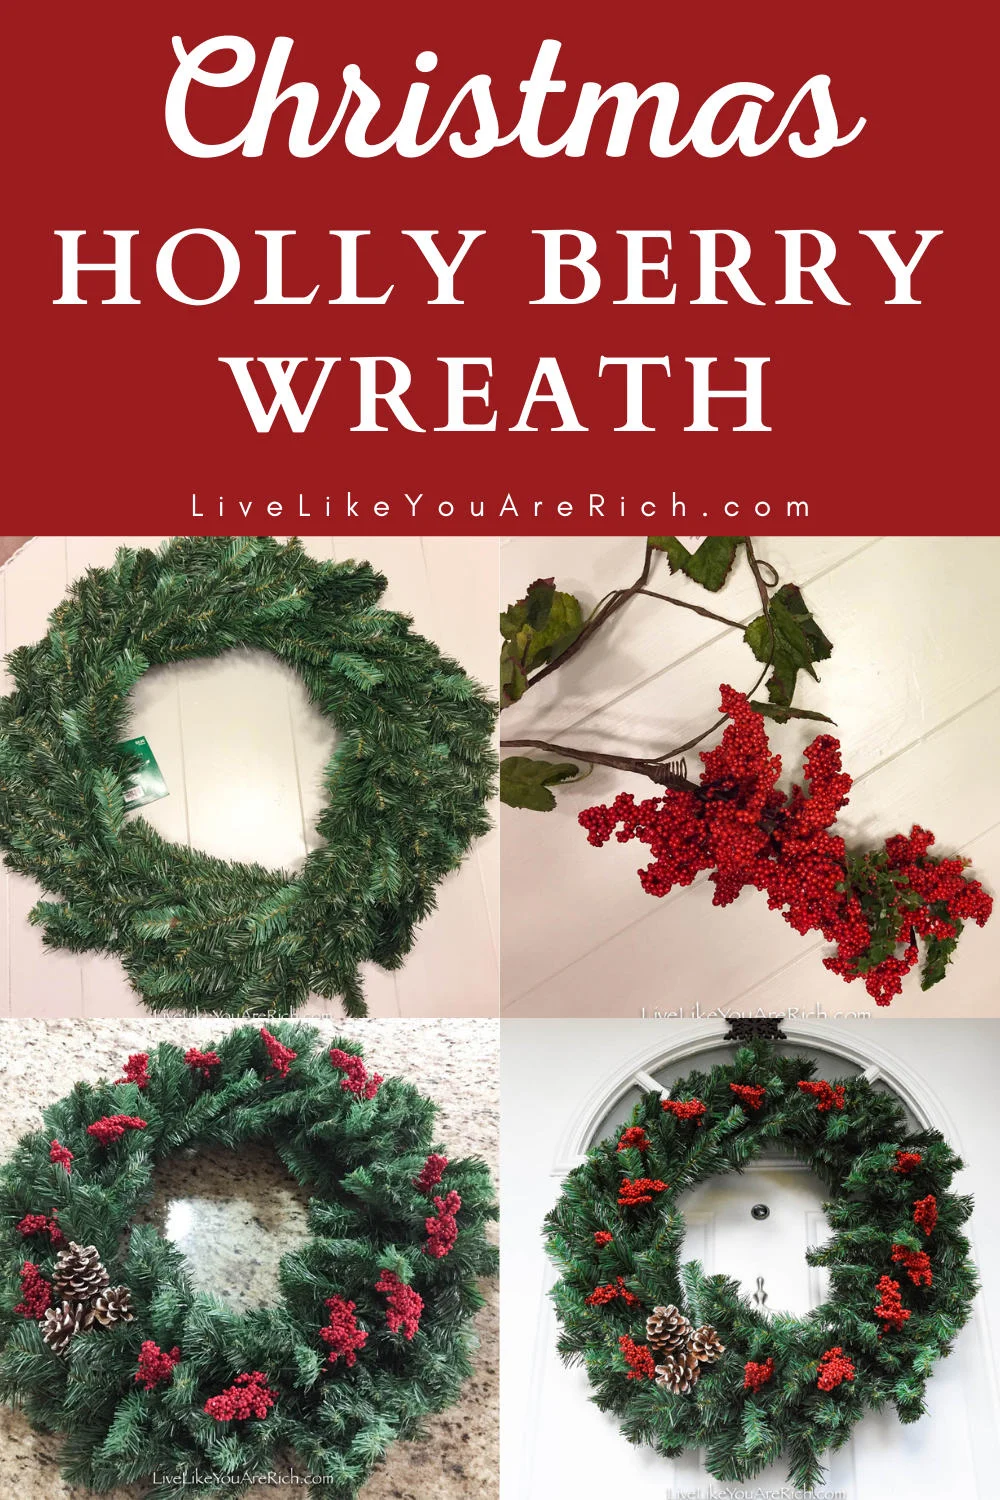 Winter is a wonderful time of the year. I love to see all of the wreaths, lights, and holiday decor people have or make. Making Christmas wreaths is something I really enjoy. Yet, because Christmas is such a busy and expensive time of the year, I usually like to keep the wreaths I make simple, Inexpensive, and quick. This Christmas Holly Berry Wreath is simple and inexpensive. It cost only $10.00 and took less than 10 minutes to make. #christmas #christmaswreath